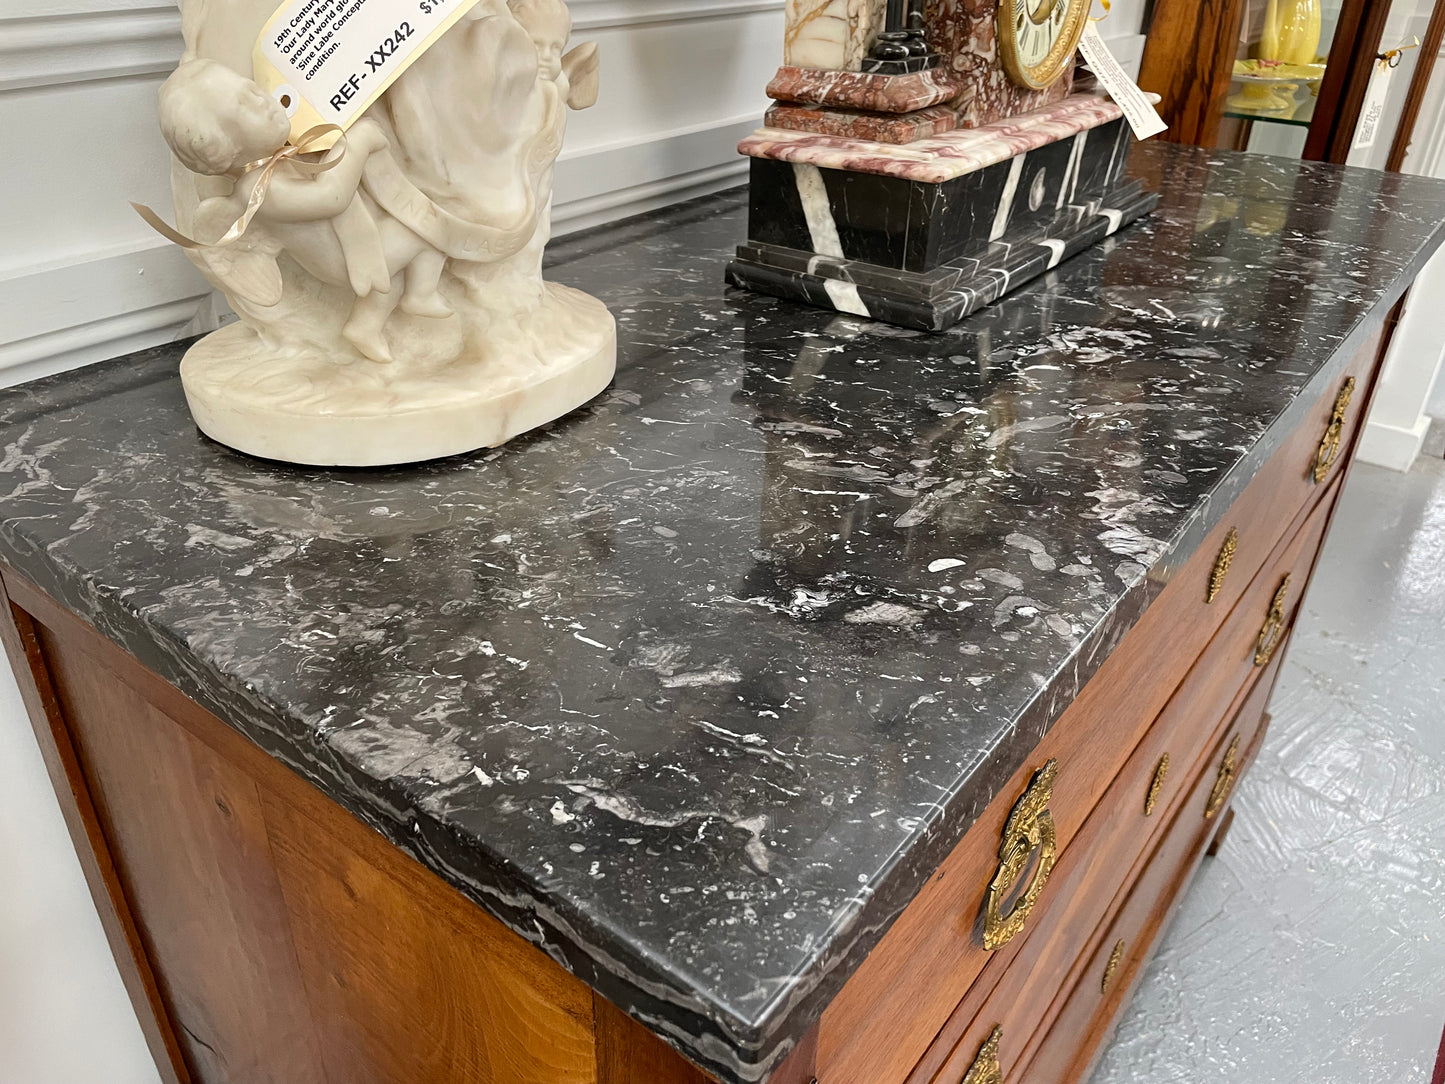 Magnificent early 19th Century French Walnut Empire three drawer commode with a stunning black/grey marble top and beautifully decorated handles. It has been sourced directly from France and is in good original condition. 